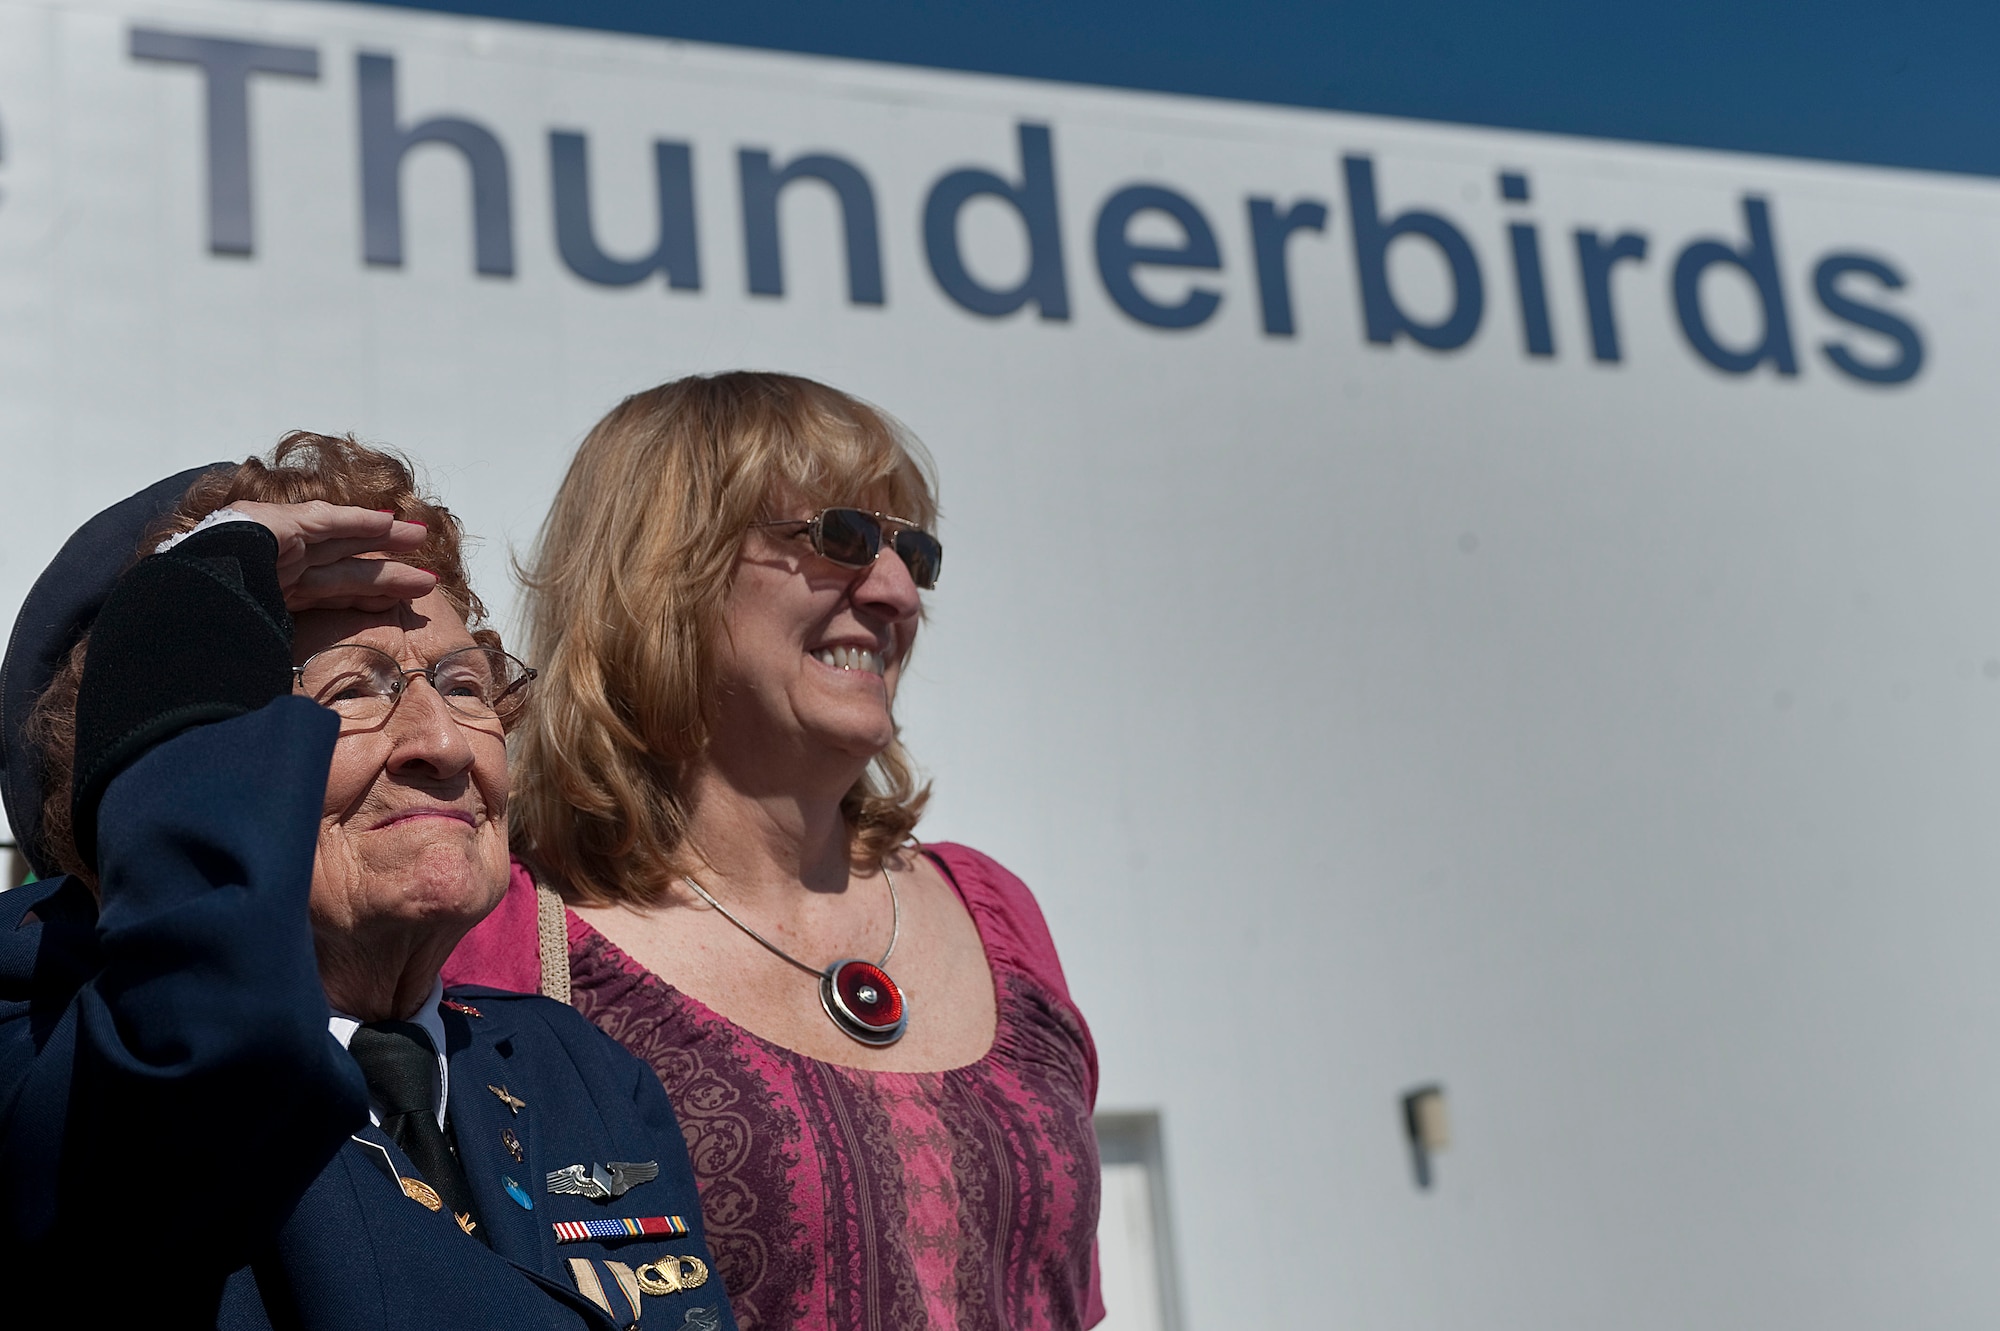 Betty Wall Strohfus, a WWII Women Airforce Service Pilot, and Julianne Reed, Strohfus' daughter, watch F-16 Fighting Falcons assigned to the  U.S. Air Force Aerial Demonstration Squadron "Thunderbirds," taxi during a distinguished visit Sept. 27, 2012, at Nellis Air Force Base, Nev. Strohfus visited with female pilots and support personnel assigned to the Thunderbirds during her visit to Nellis. (U.S. Air Force photo by Staff Sgt. Christopher Hubenthal)